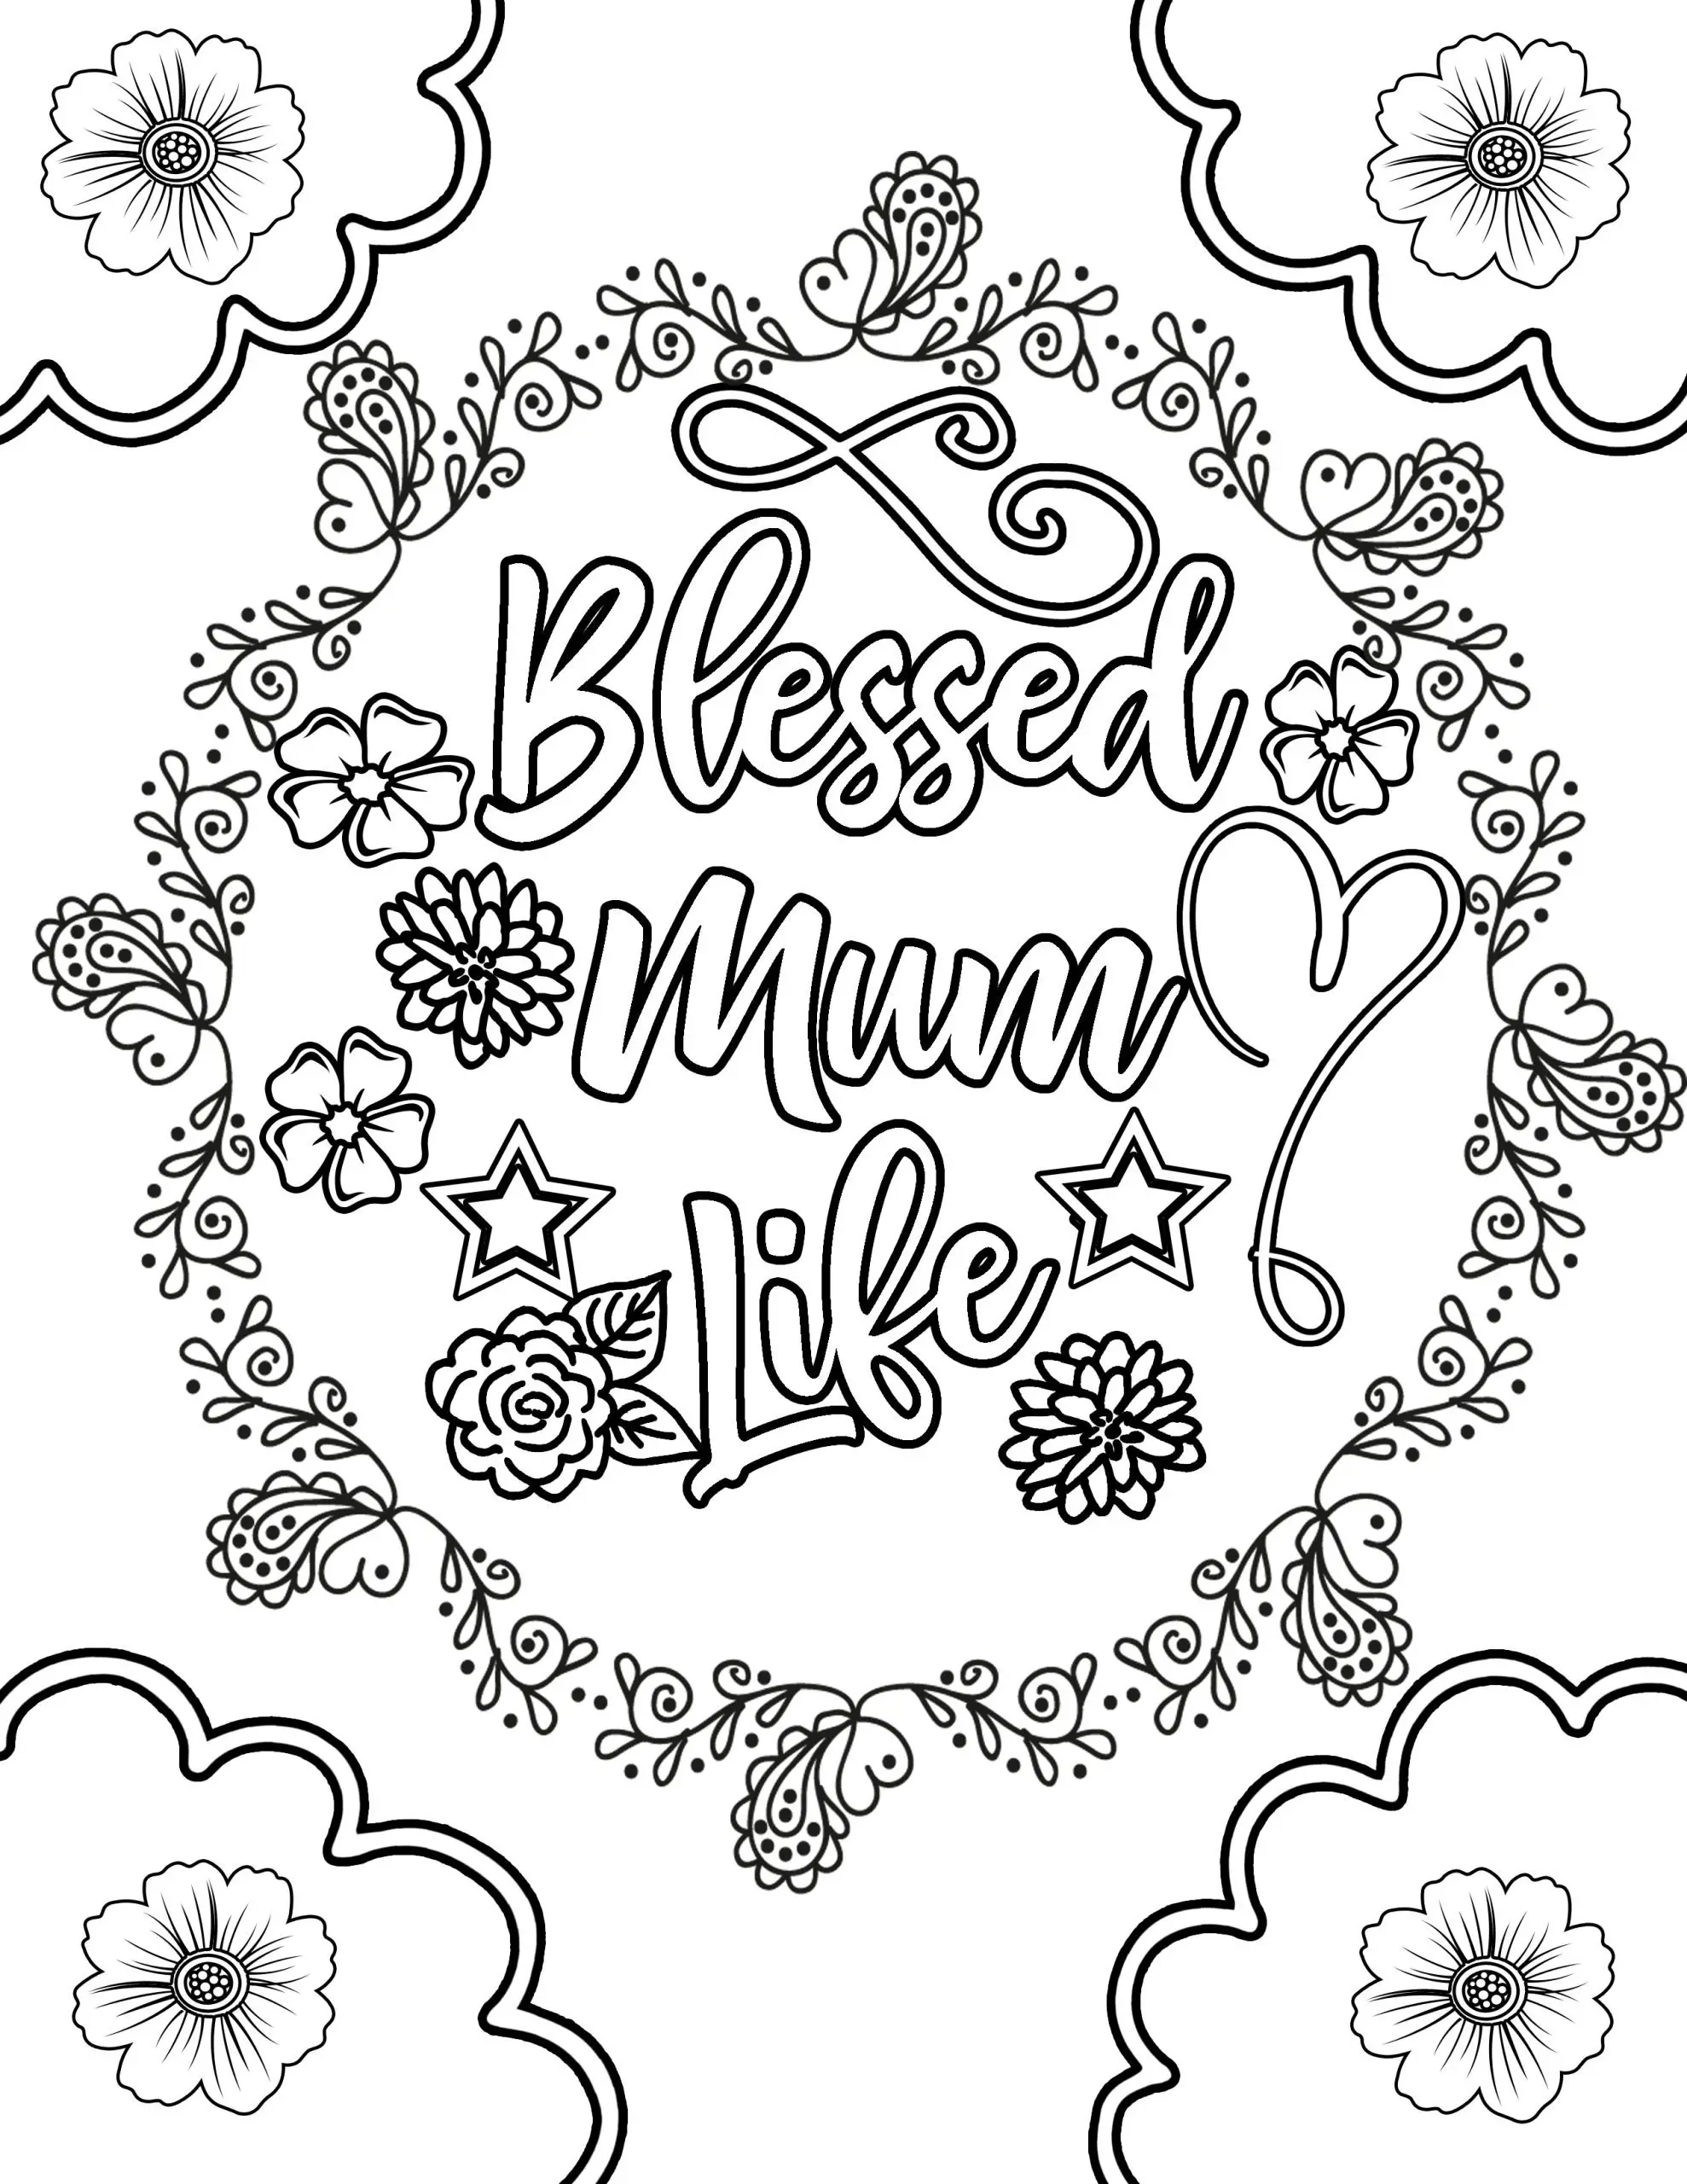 Blessed Mum Life MOTHER'S DAY flower with vines and frills Clipart Coloring Pages for Kids Adults Art Activities Line Art